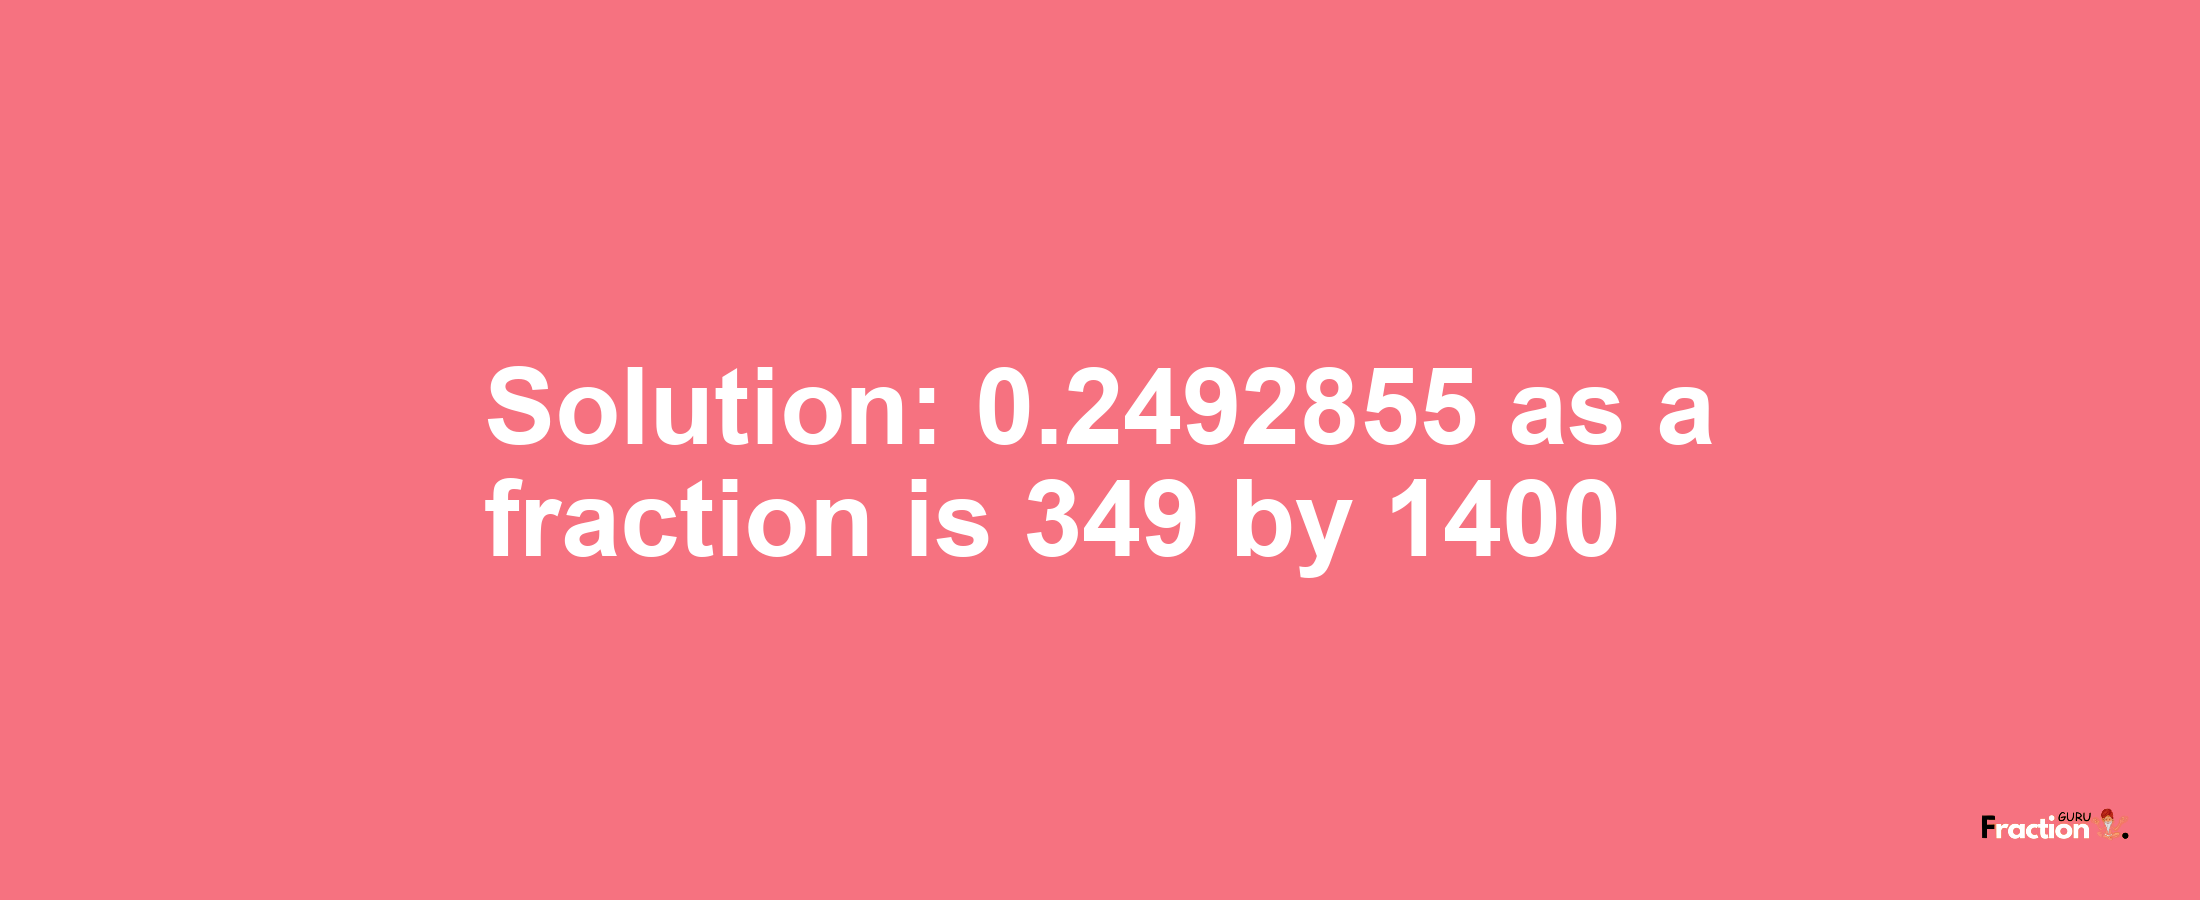 Solution:0.2492855 as a fraction is 349/1400